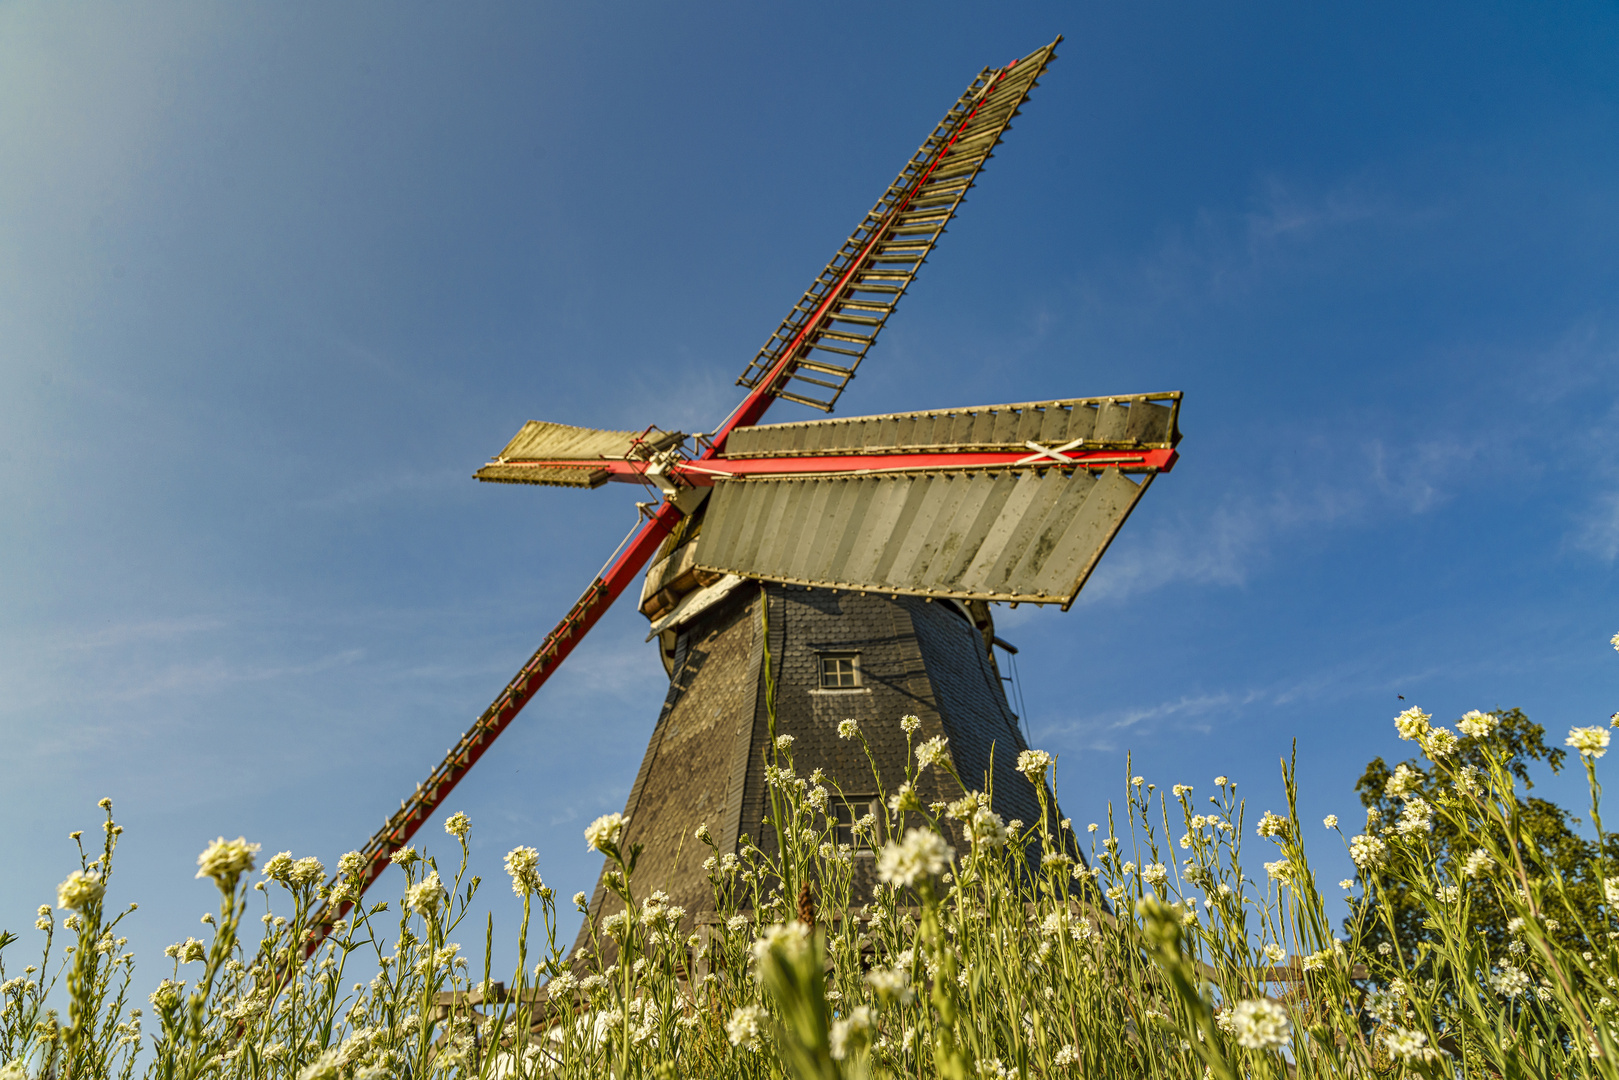 Windmühle in Worpswede, 2019.06.11